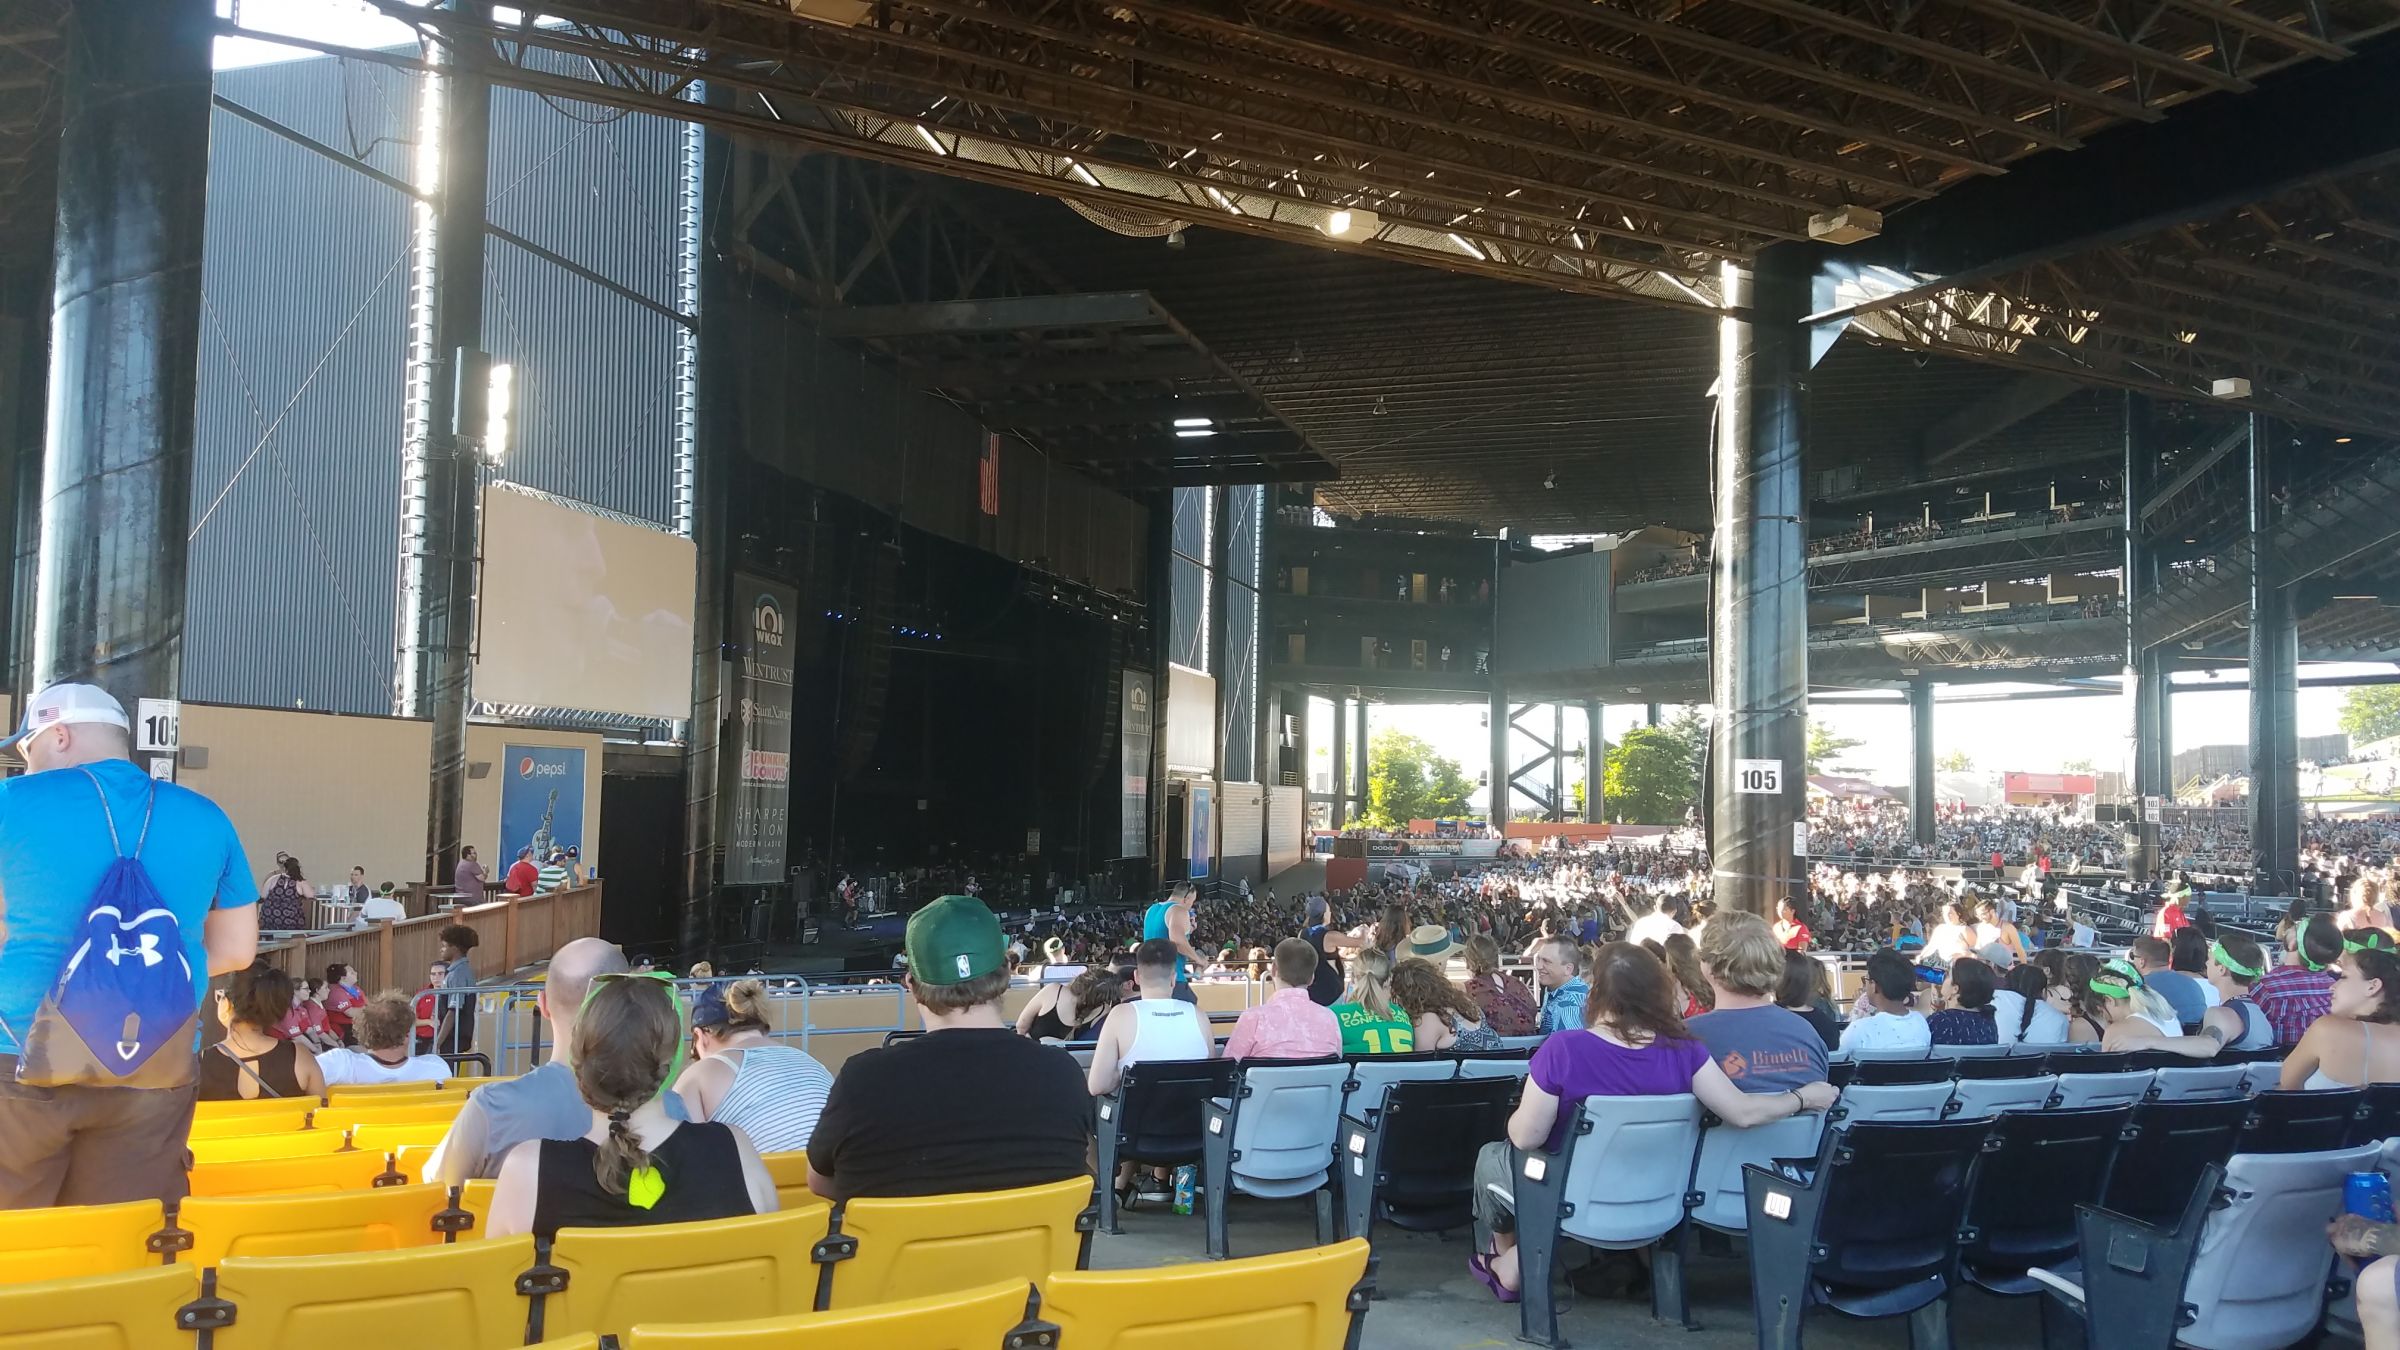 section 208, row yy seat view  - credit union 1 amphitheatre